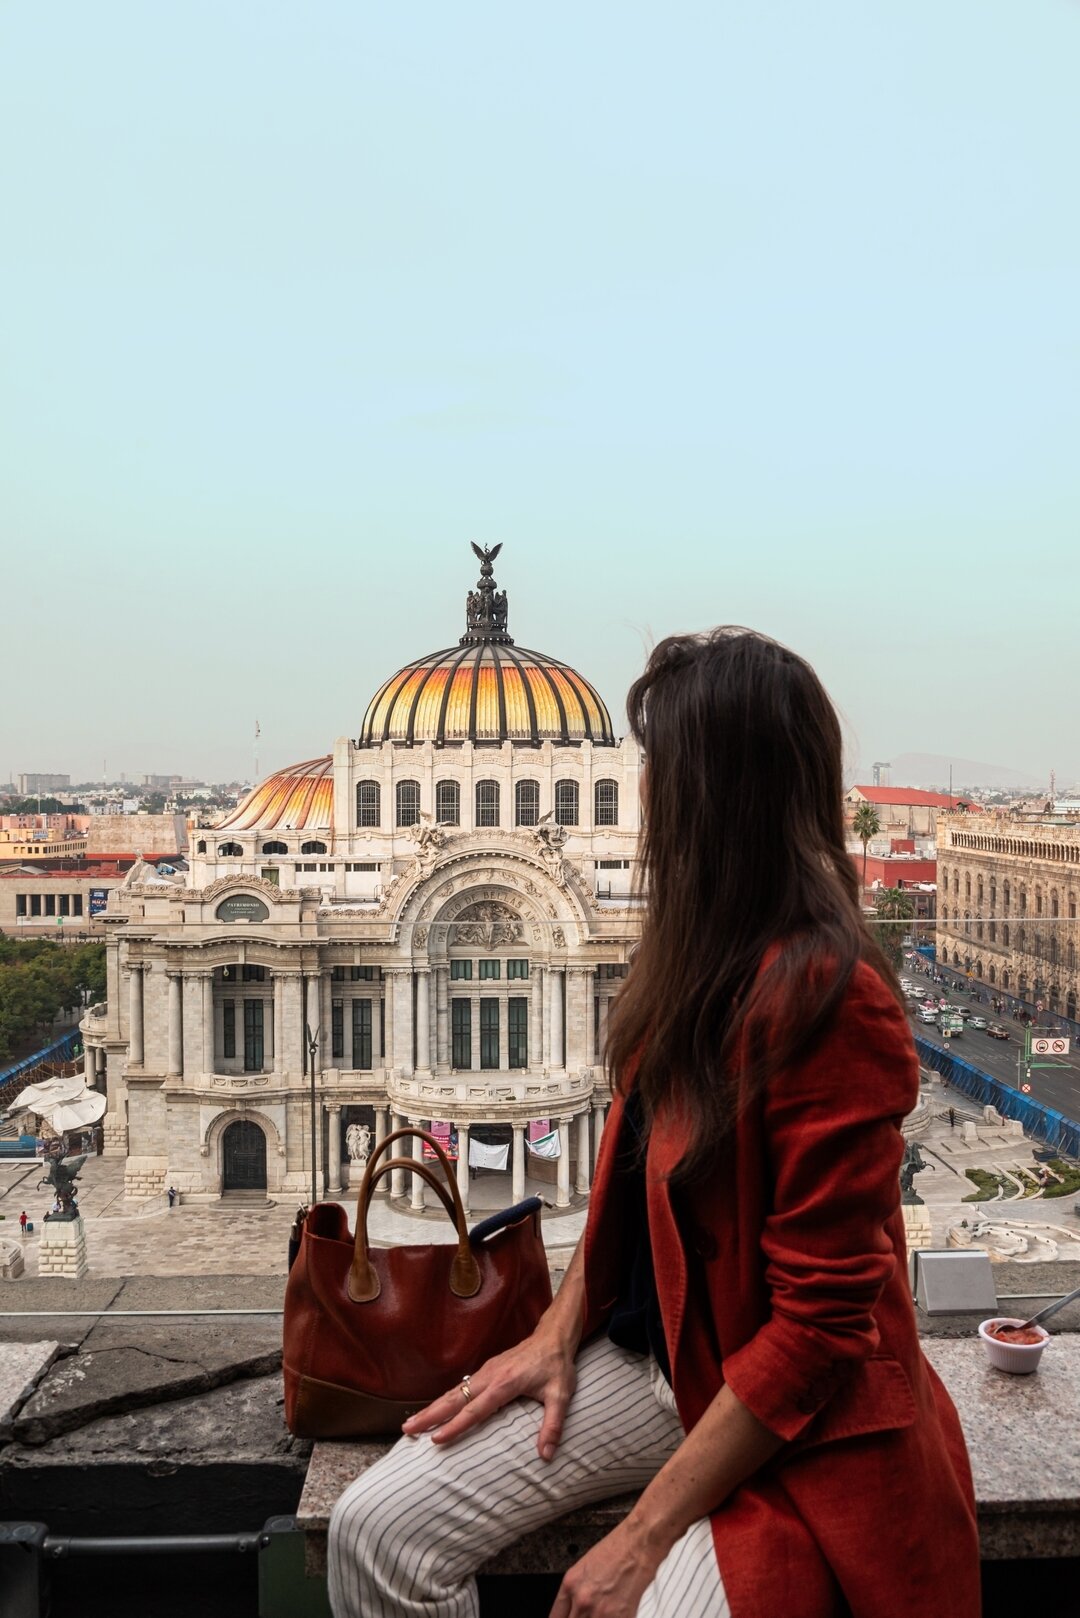 Consider this your whimsical nudge to grab that ticket and let the adventure unfold in Mexico City! Your suitcase is probably daydreaming about the colorful streets, tantalizing tacos, and the lively energy that awaits. Don't let it down &ndash; pack